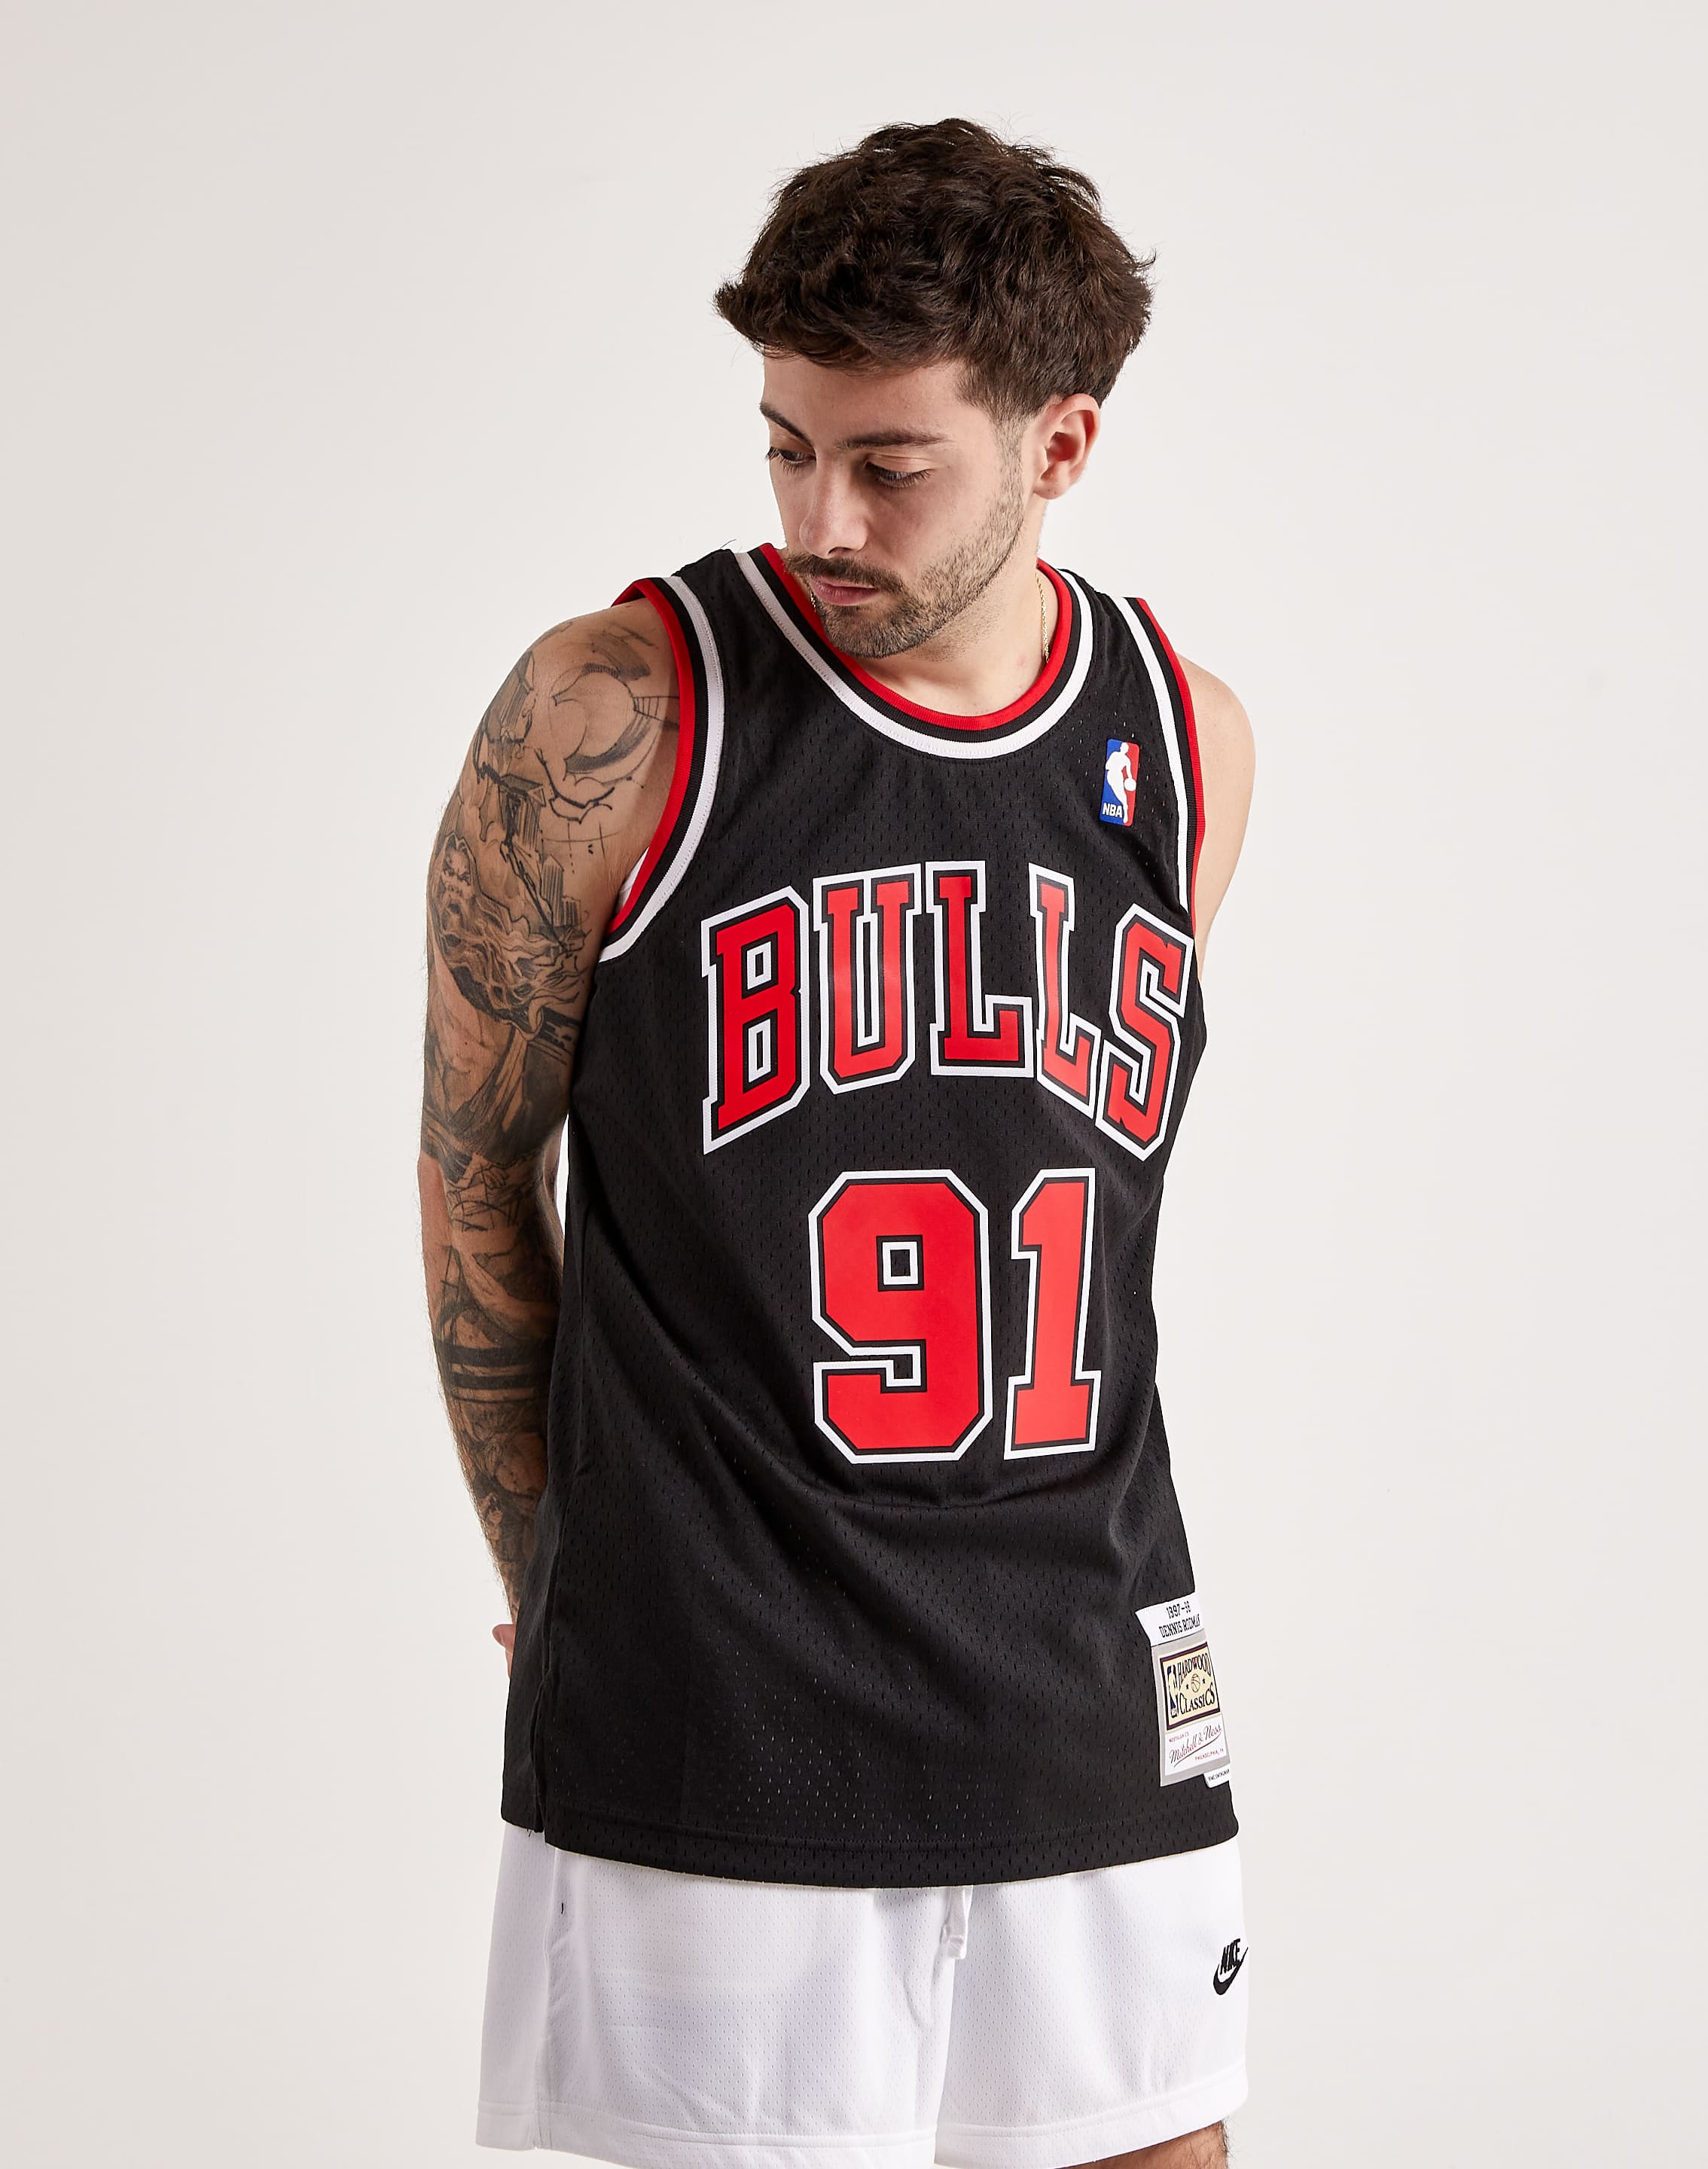 Mitchell & Ness Hardwood Classics NBA Jersey for Sale in